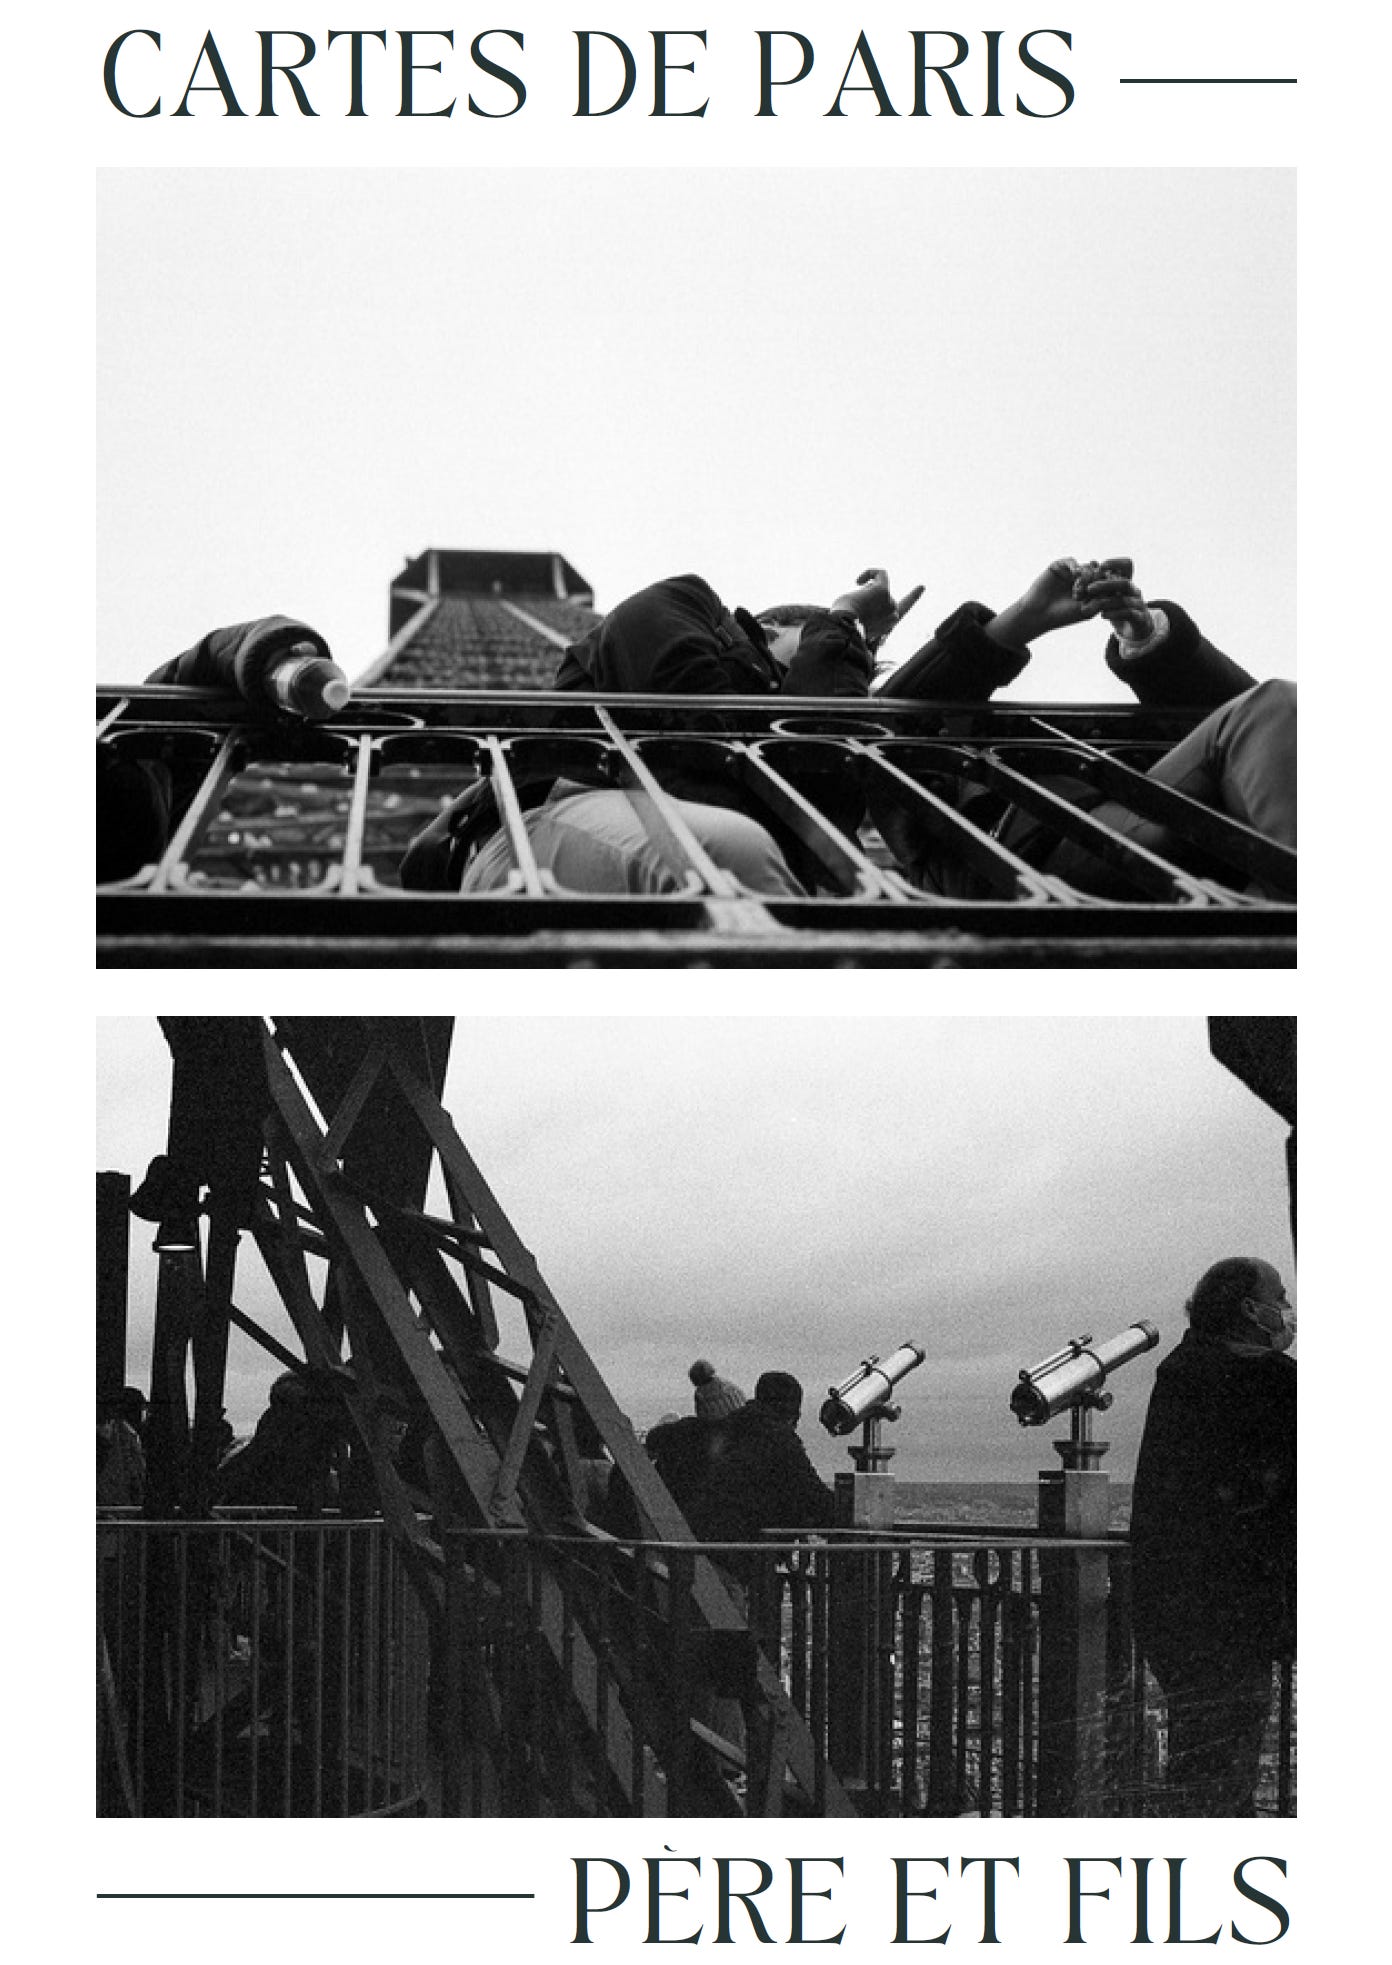 Two black and white photogaphs, one above the other, of people on the Eiffel Tower. Text above says "Cartes de Paris", text below says "Pere et fils"